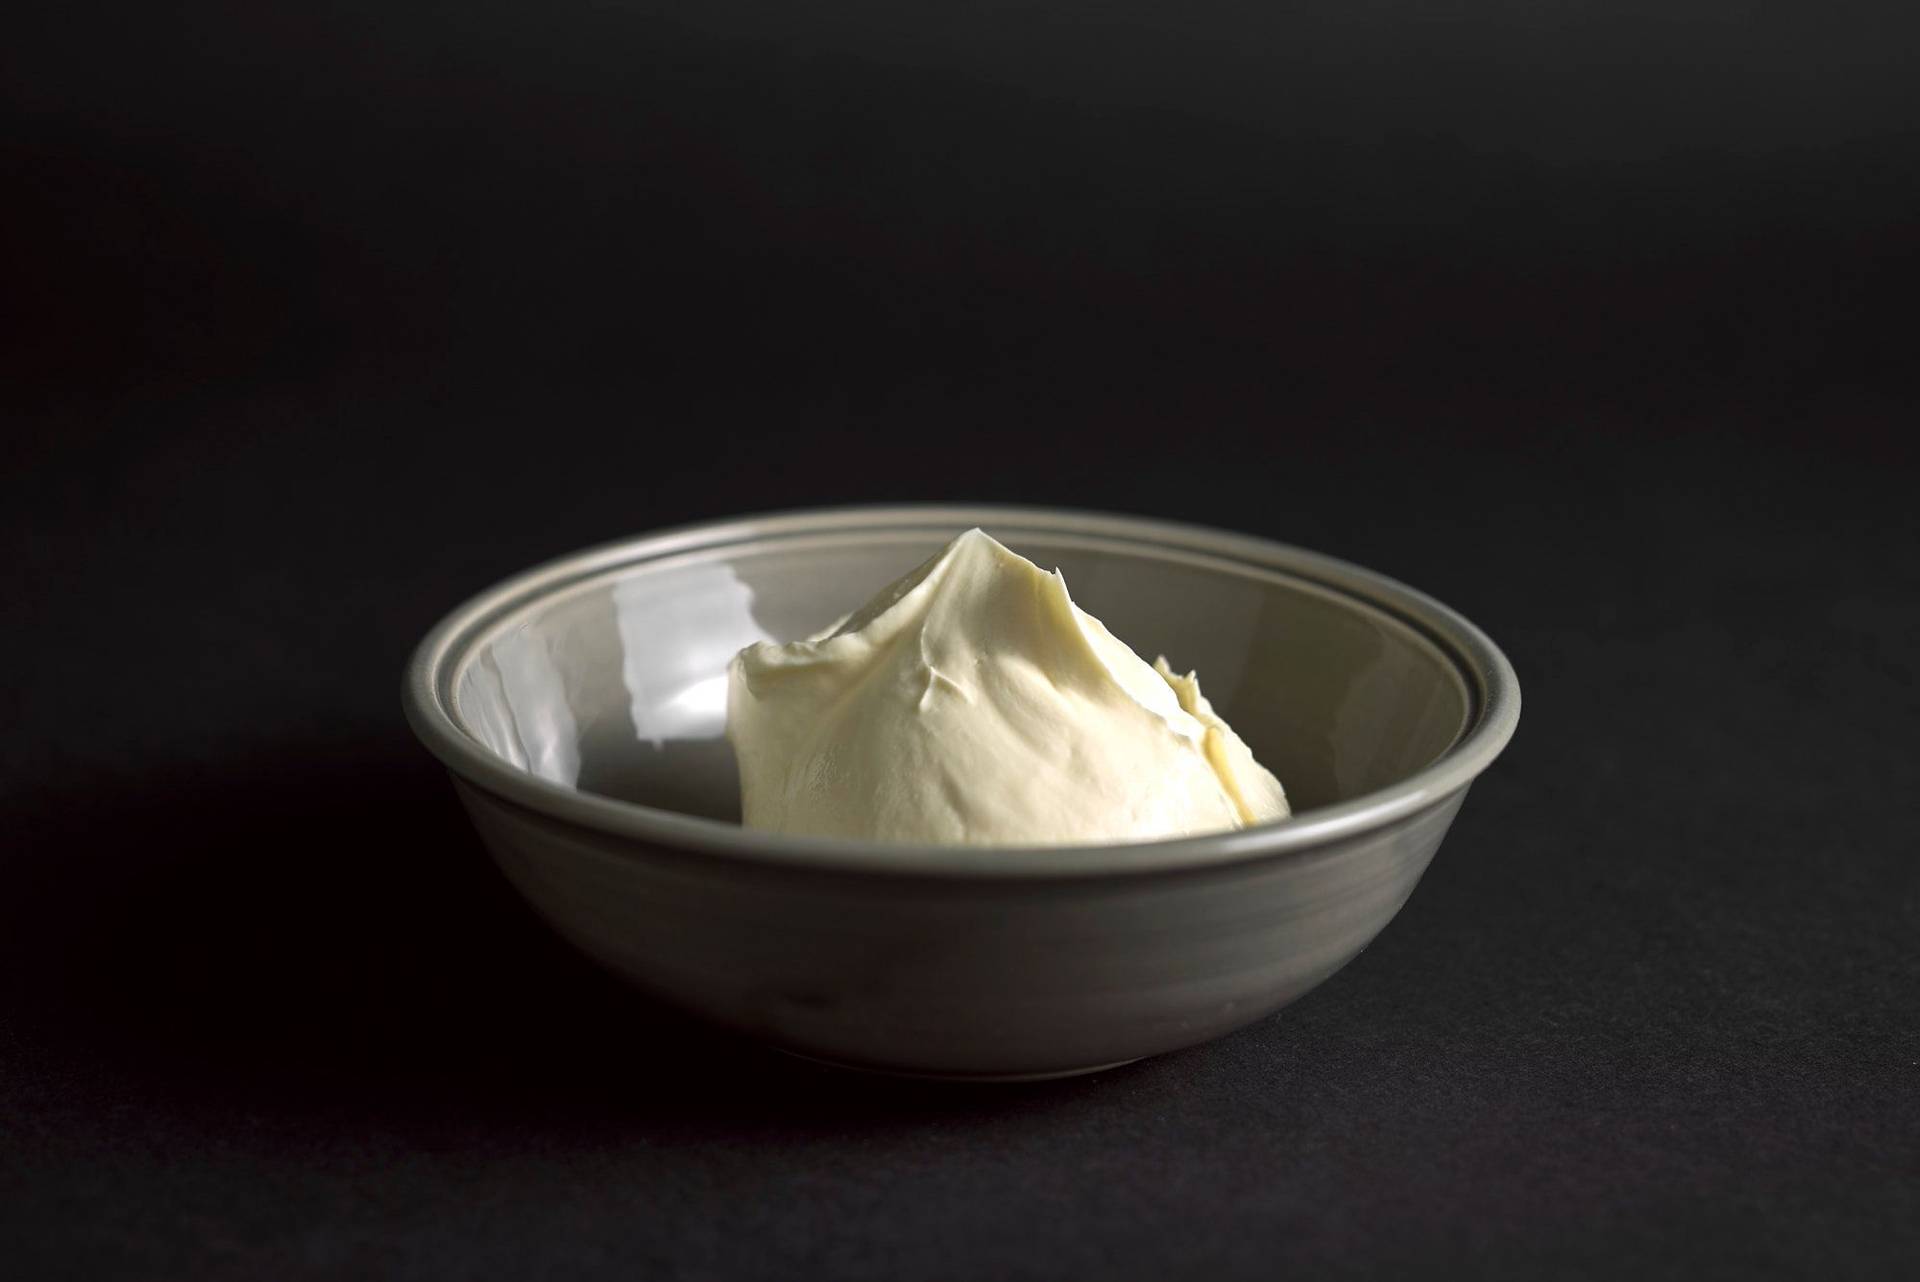 creme fraiche in a gray bowl with black background